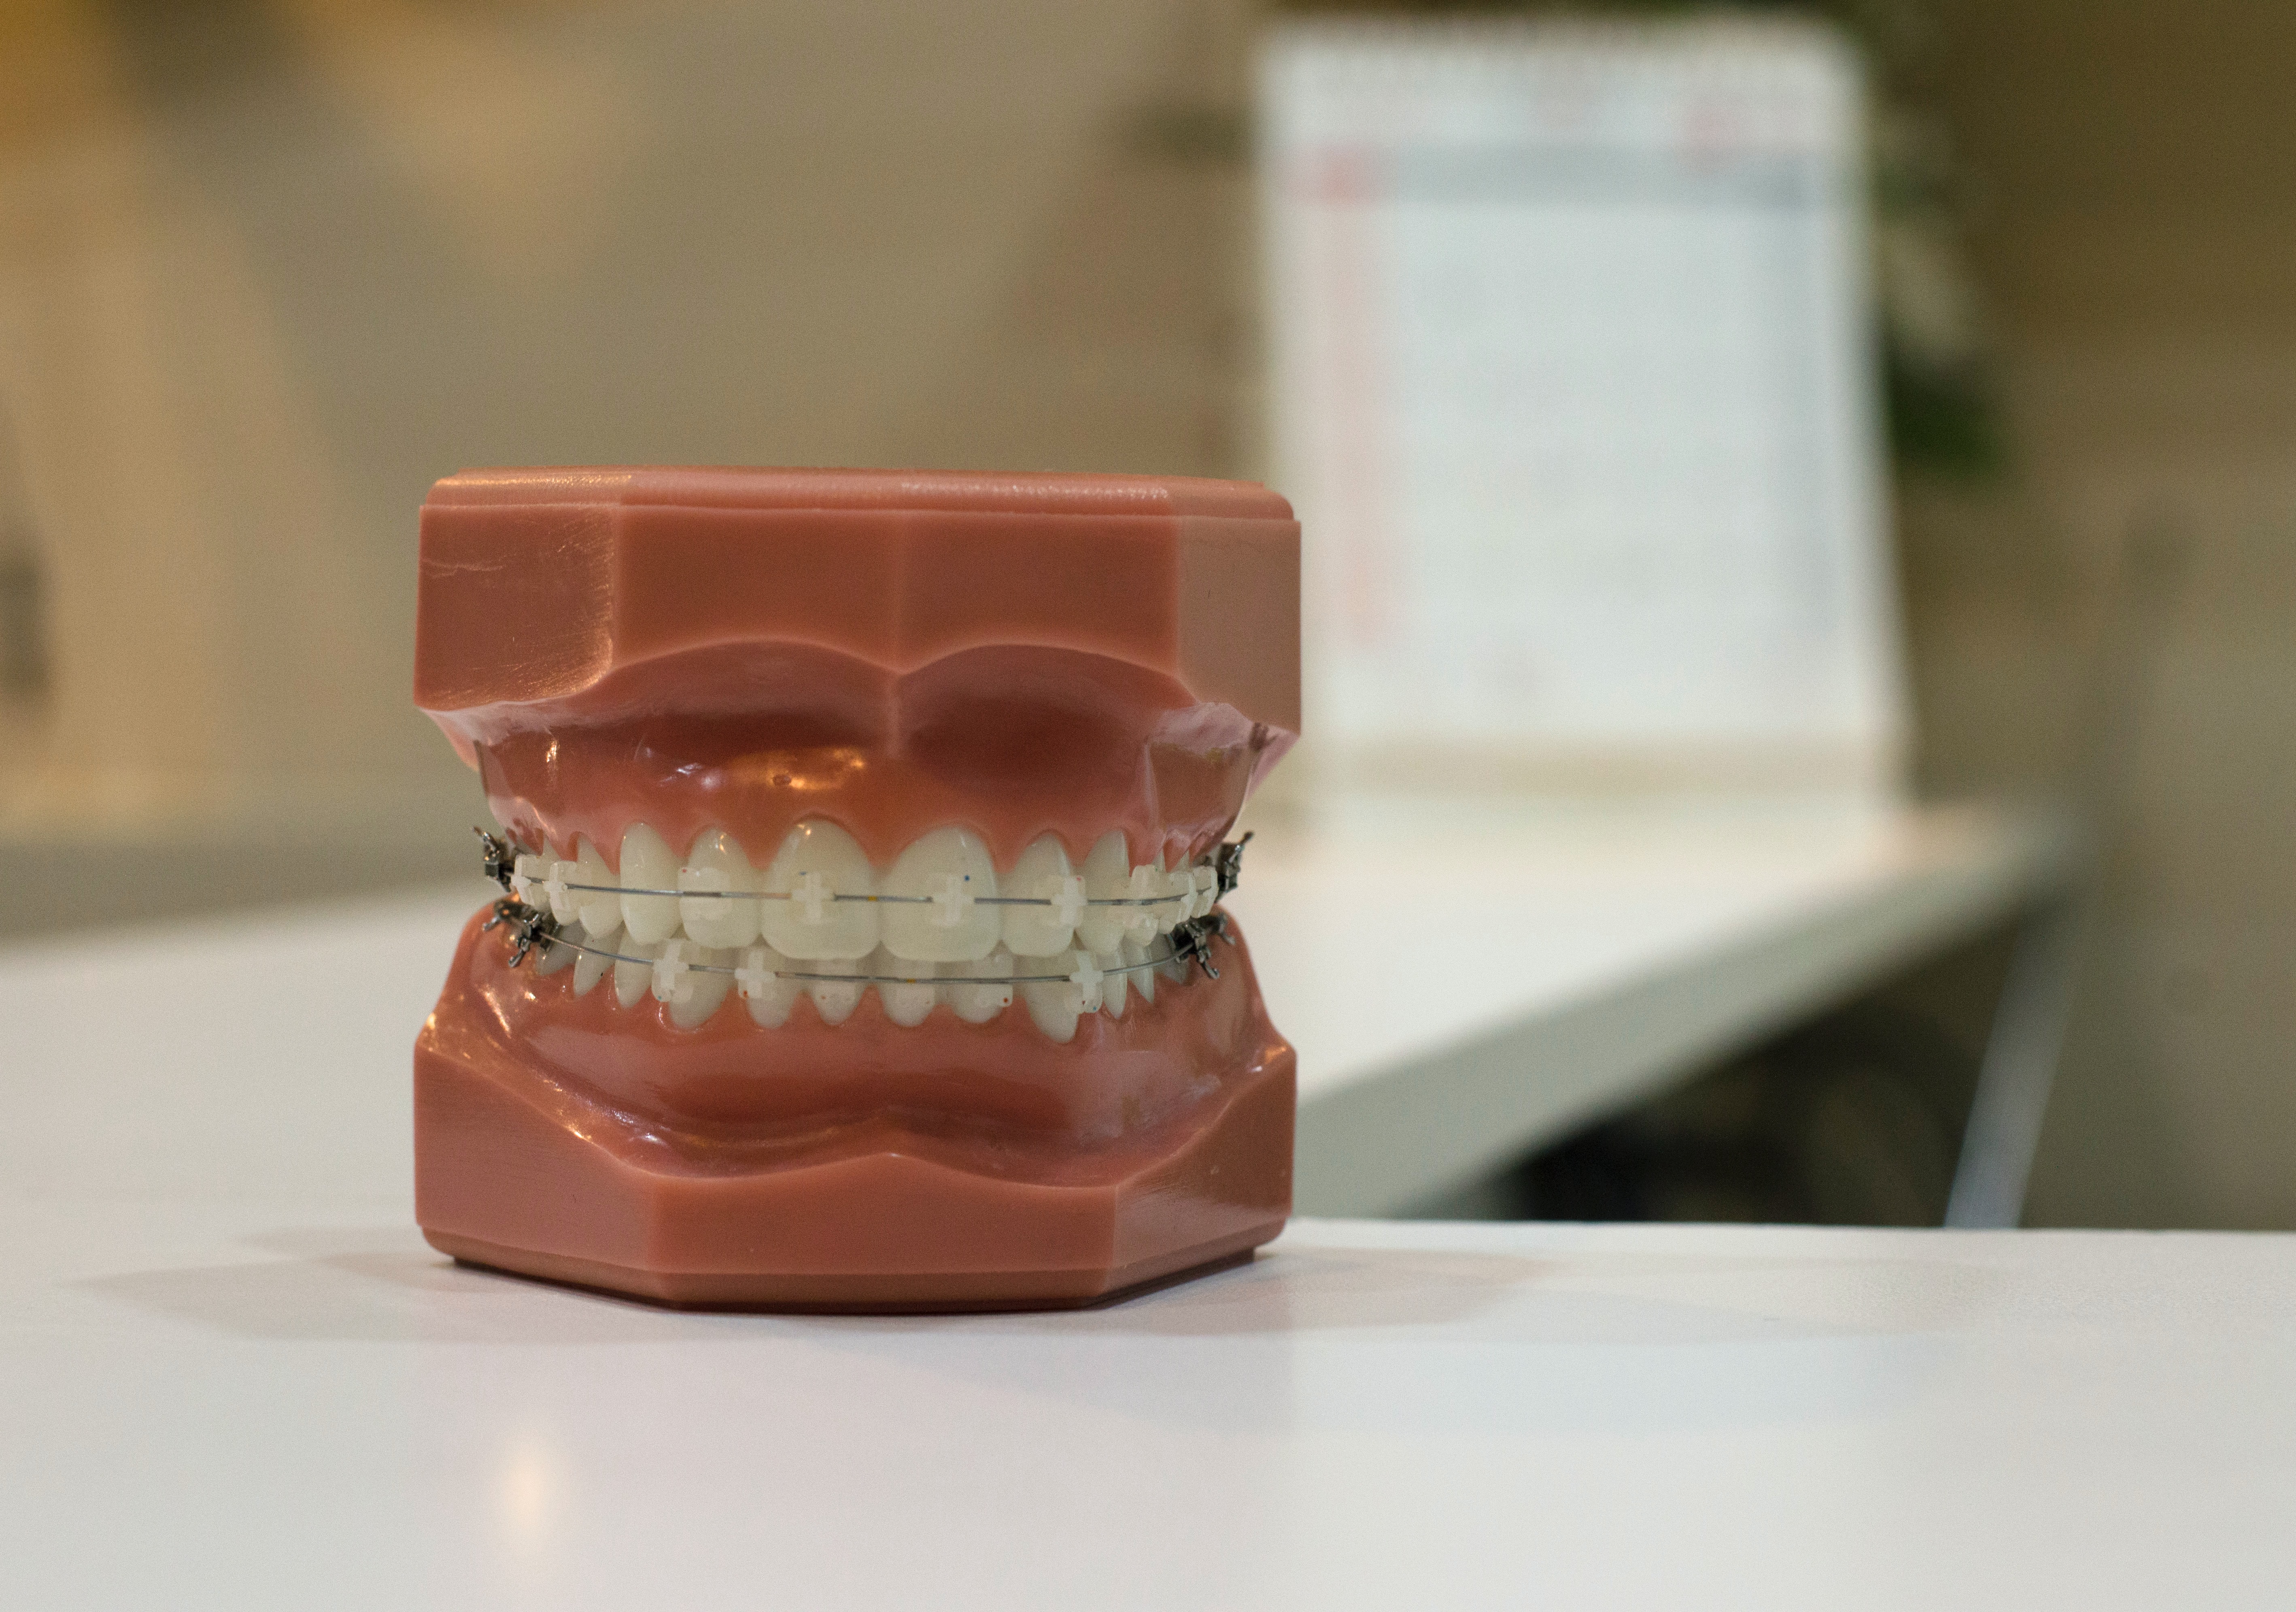 Photograph of model teeth with Orthodontics with tooth colored brackets, Ann Arbor, MI